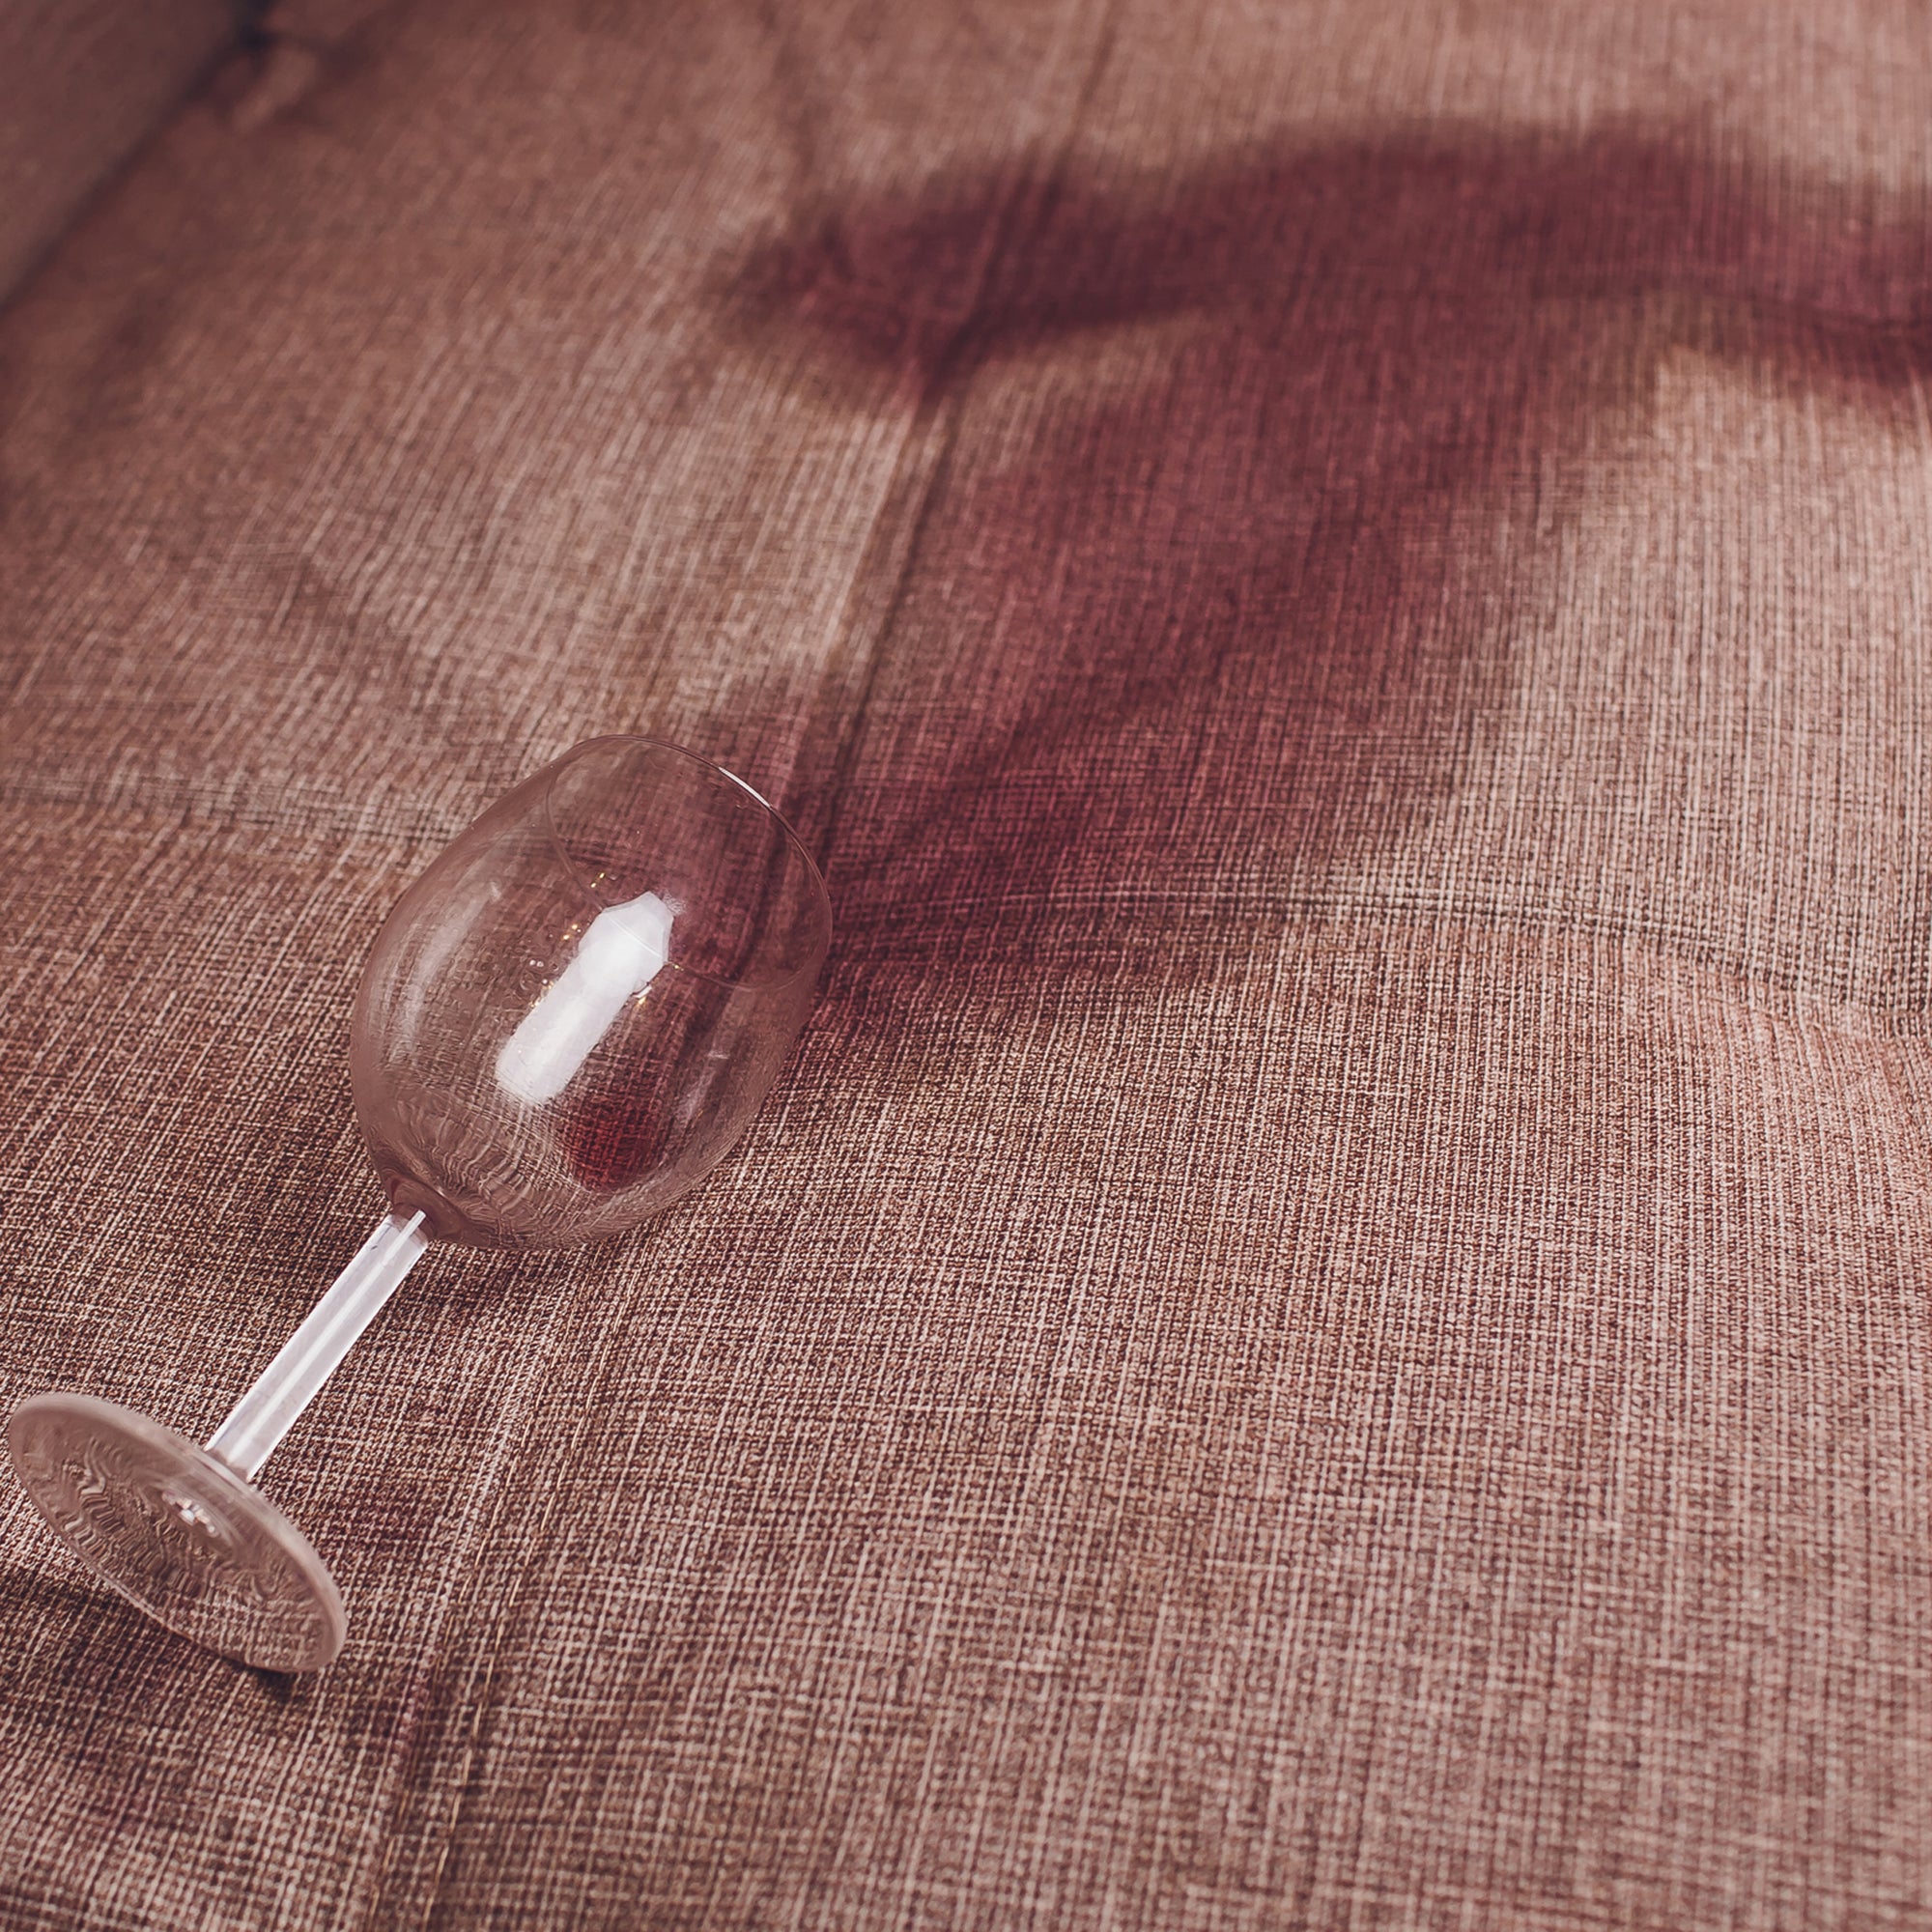 Quick Fixes for Removing Stains from Couches - Nolan Interior